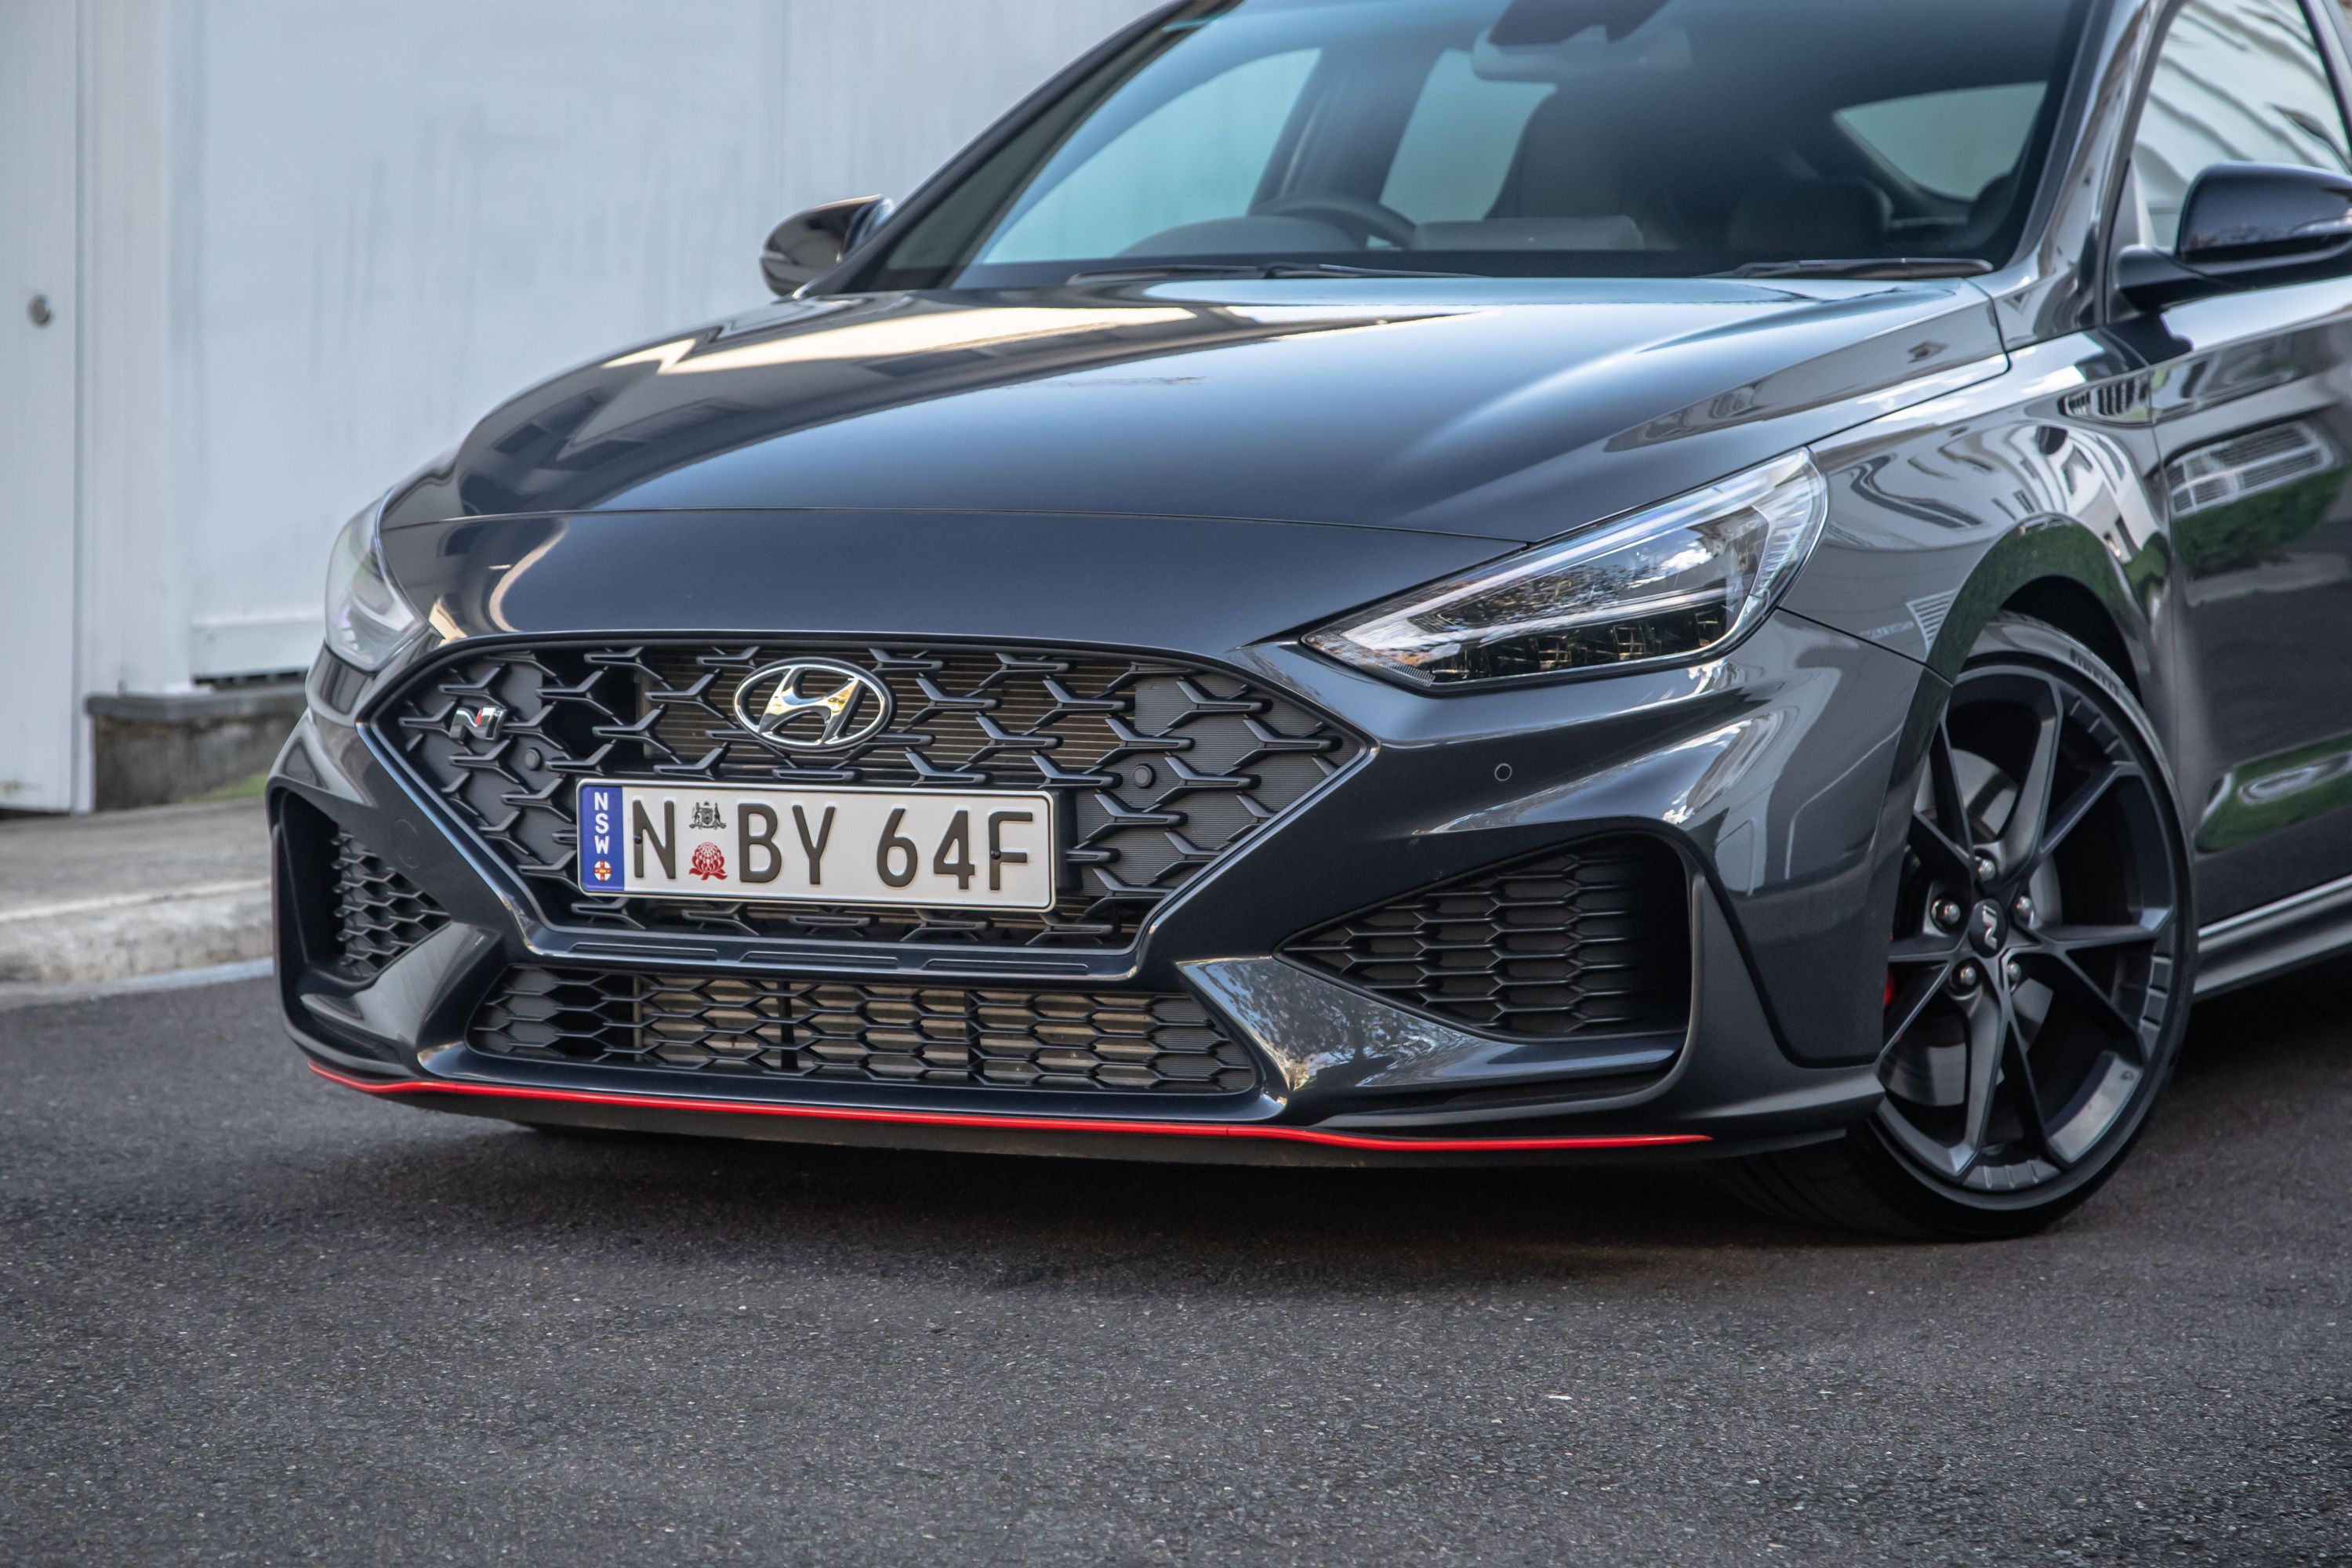 The MOST UNIQUE i30N you can buy!  2022 Hyundai i30N Fastback Review 